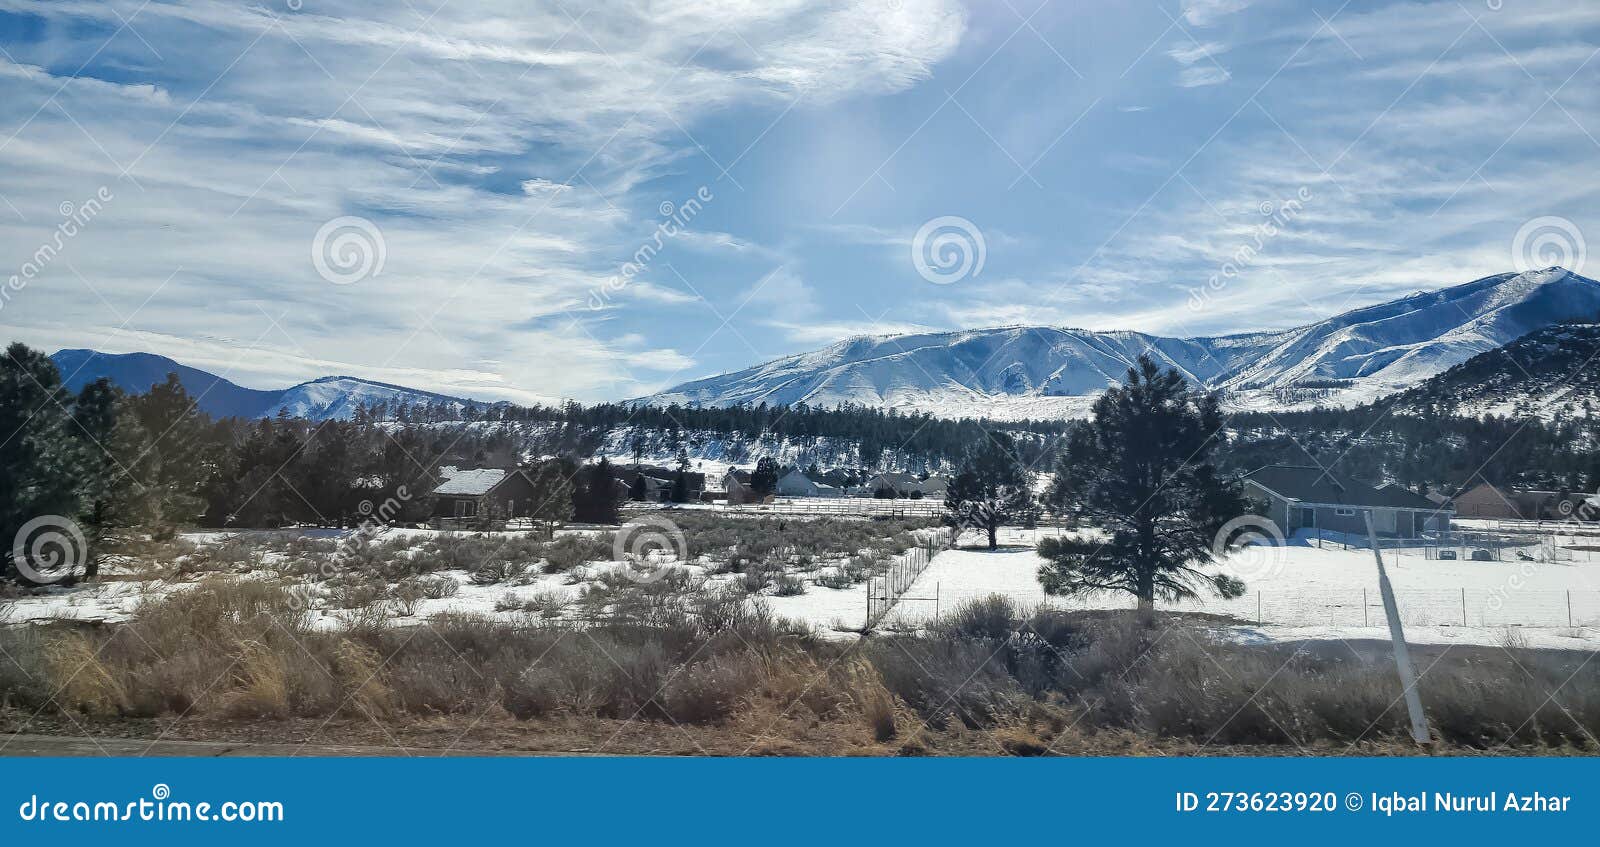 Flagstaff after Snowfall stock photo. Image of cloud 273623920